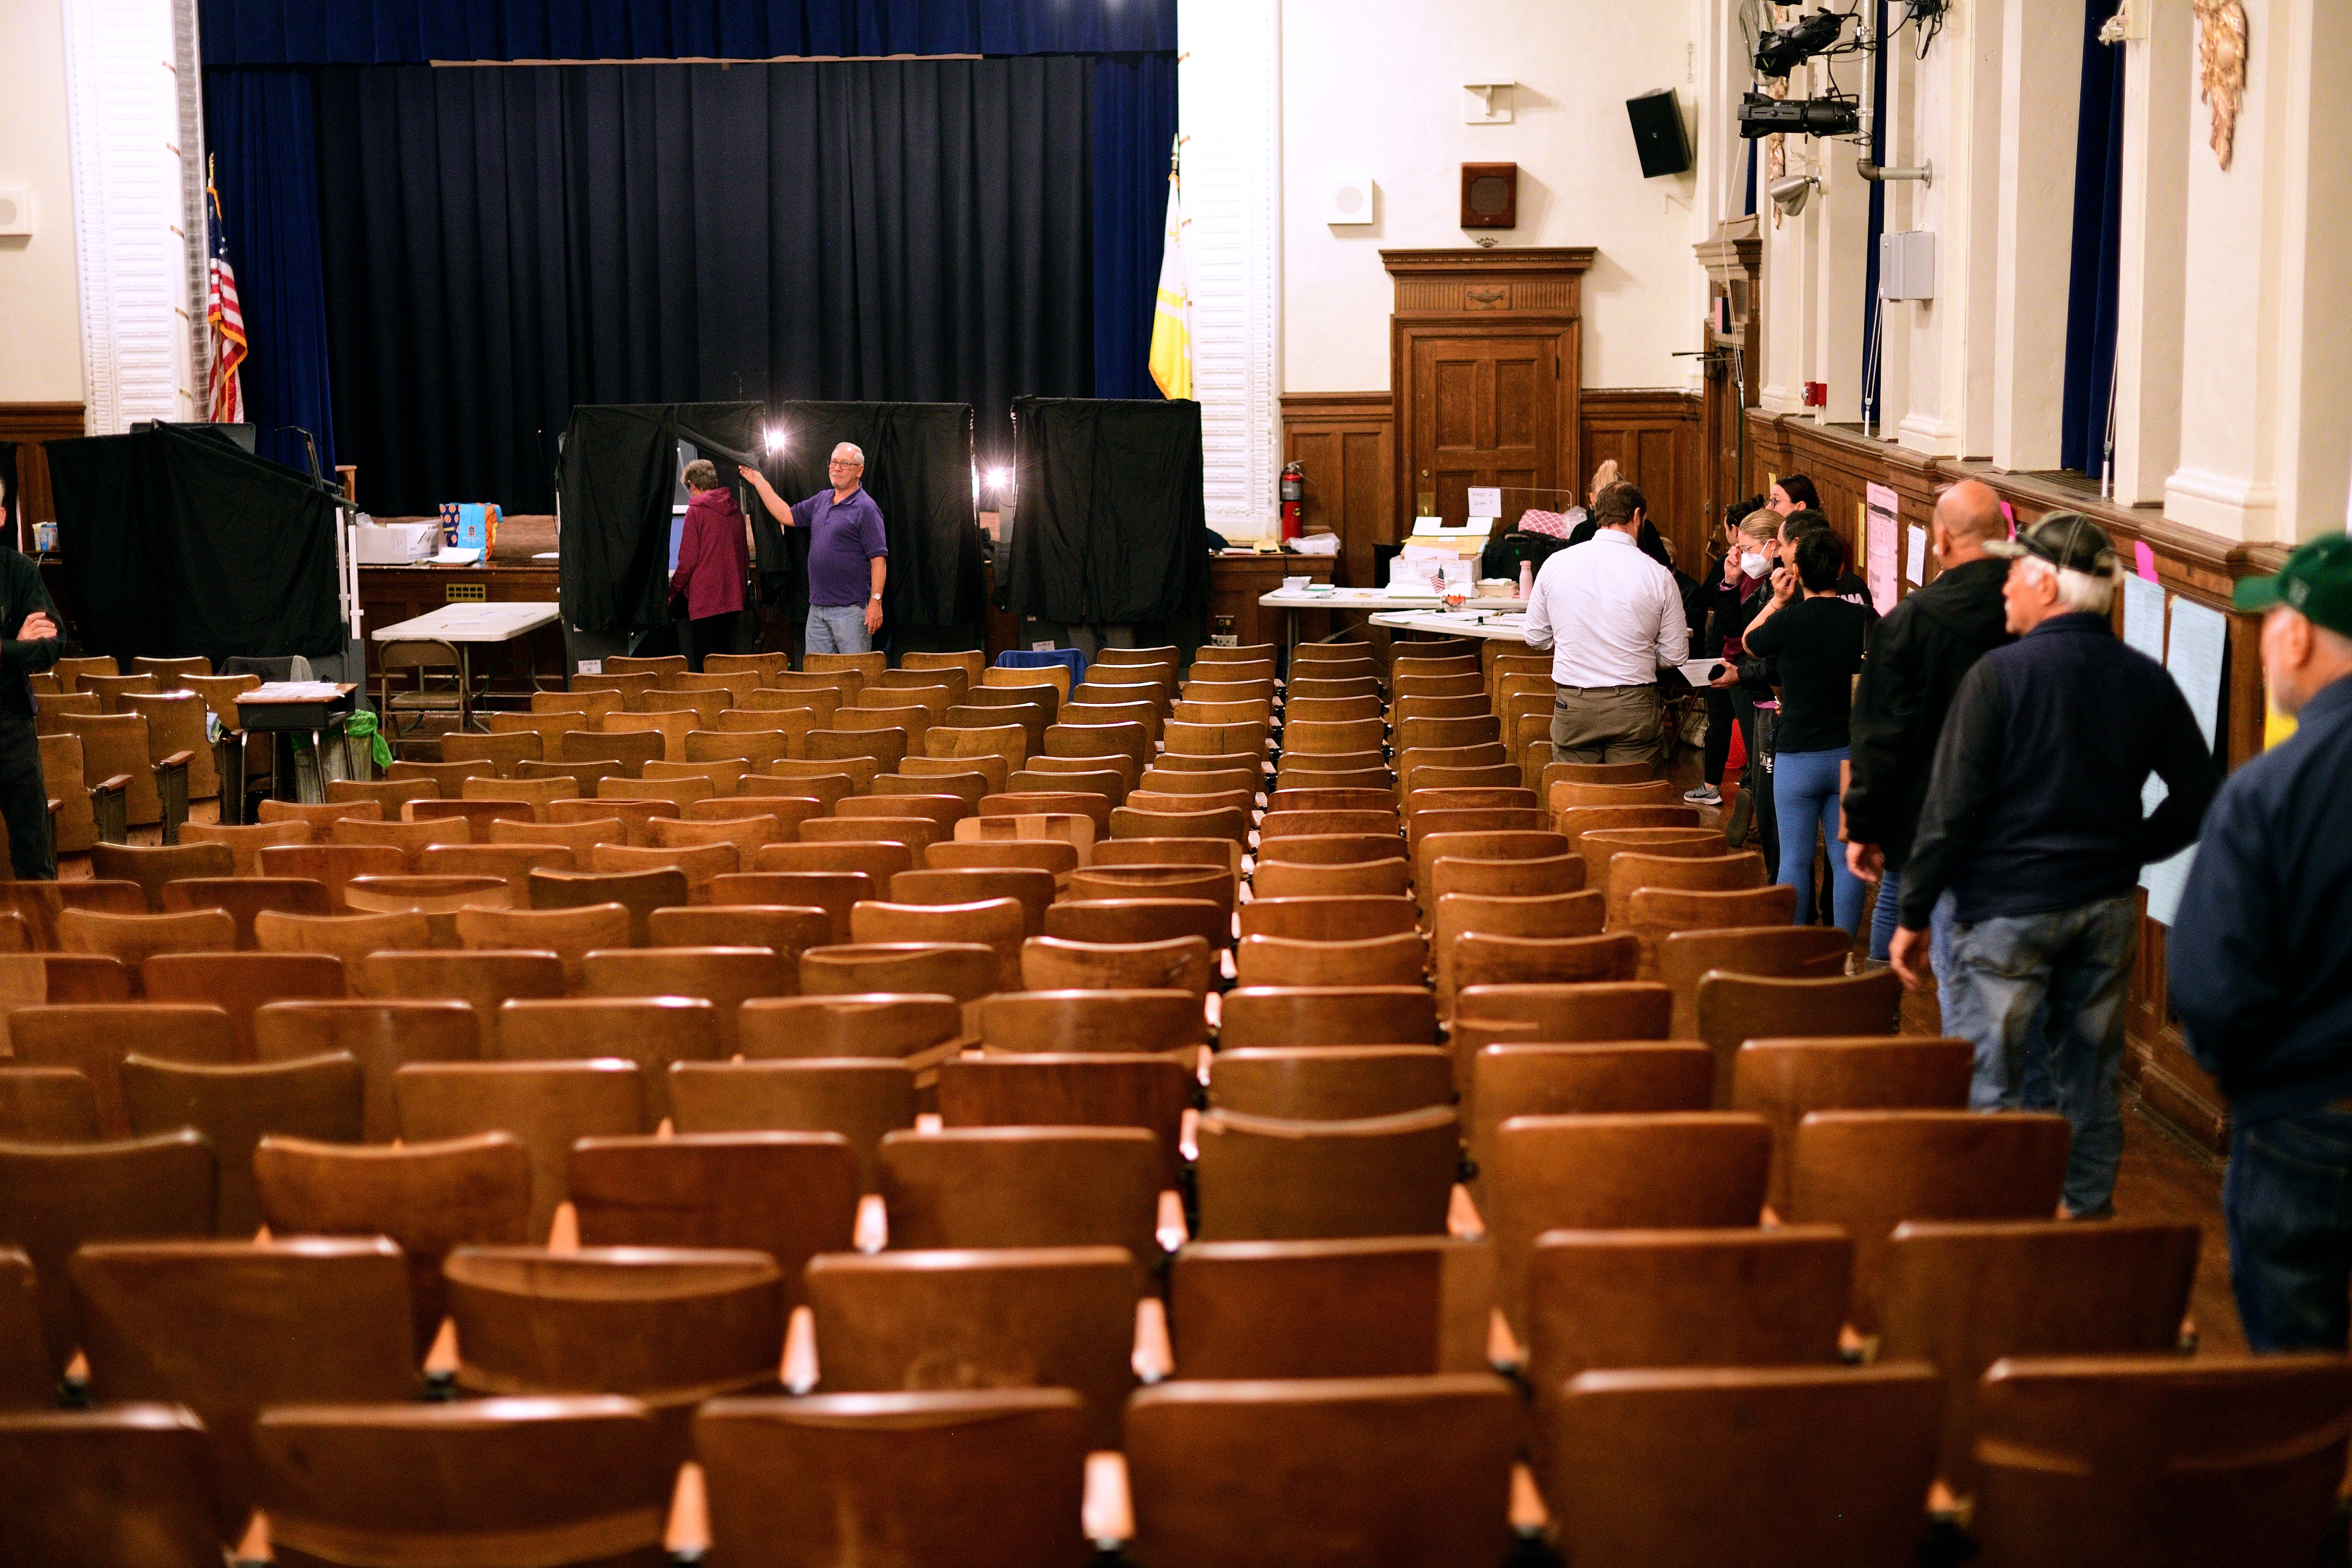 A line of people stand in a narrow aisle against a wall in a room filled with many rows of folding seats. A row of curtained voting machines stands at the front before a stage.